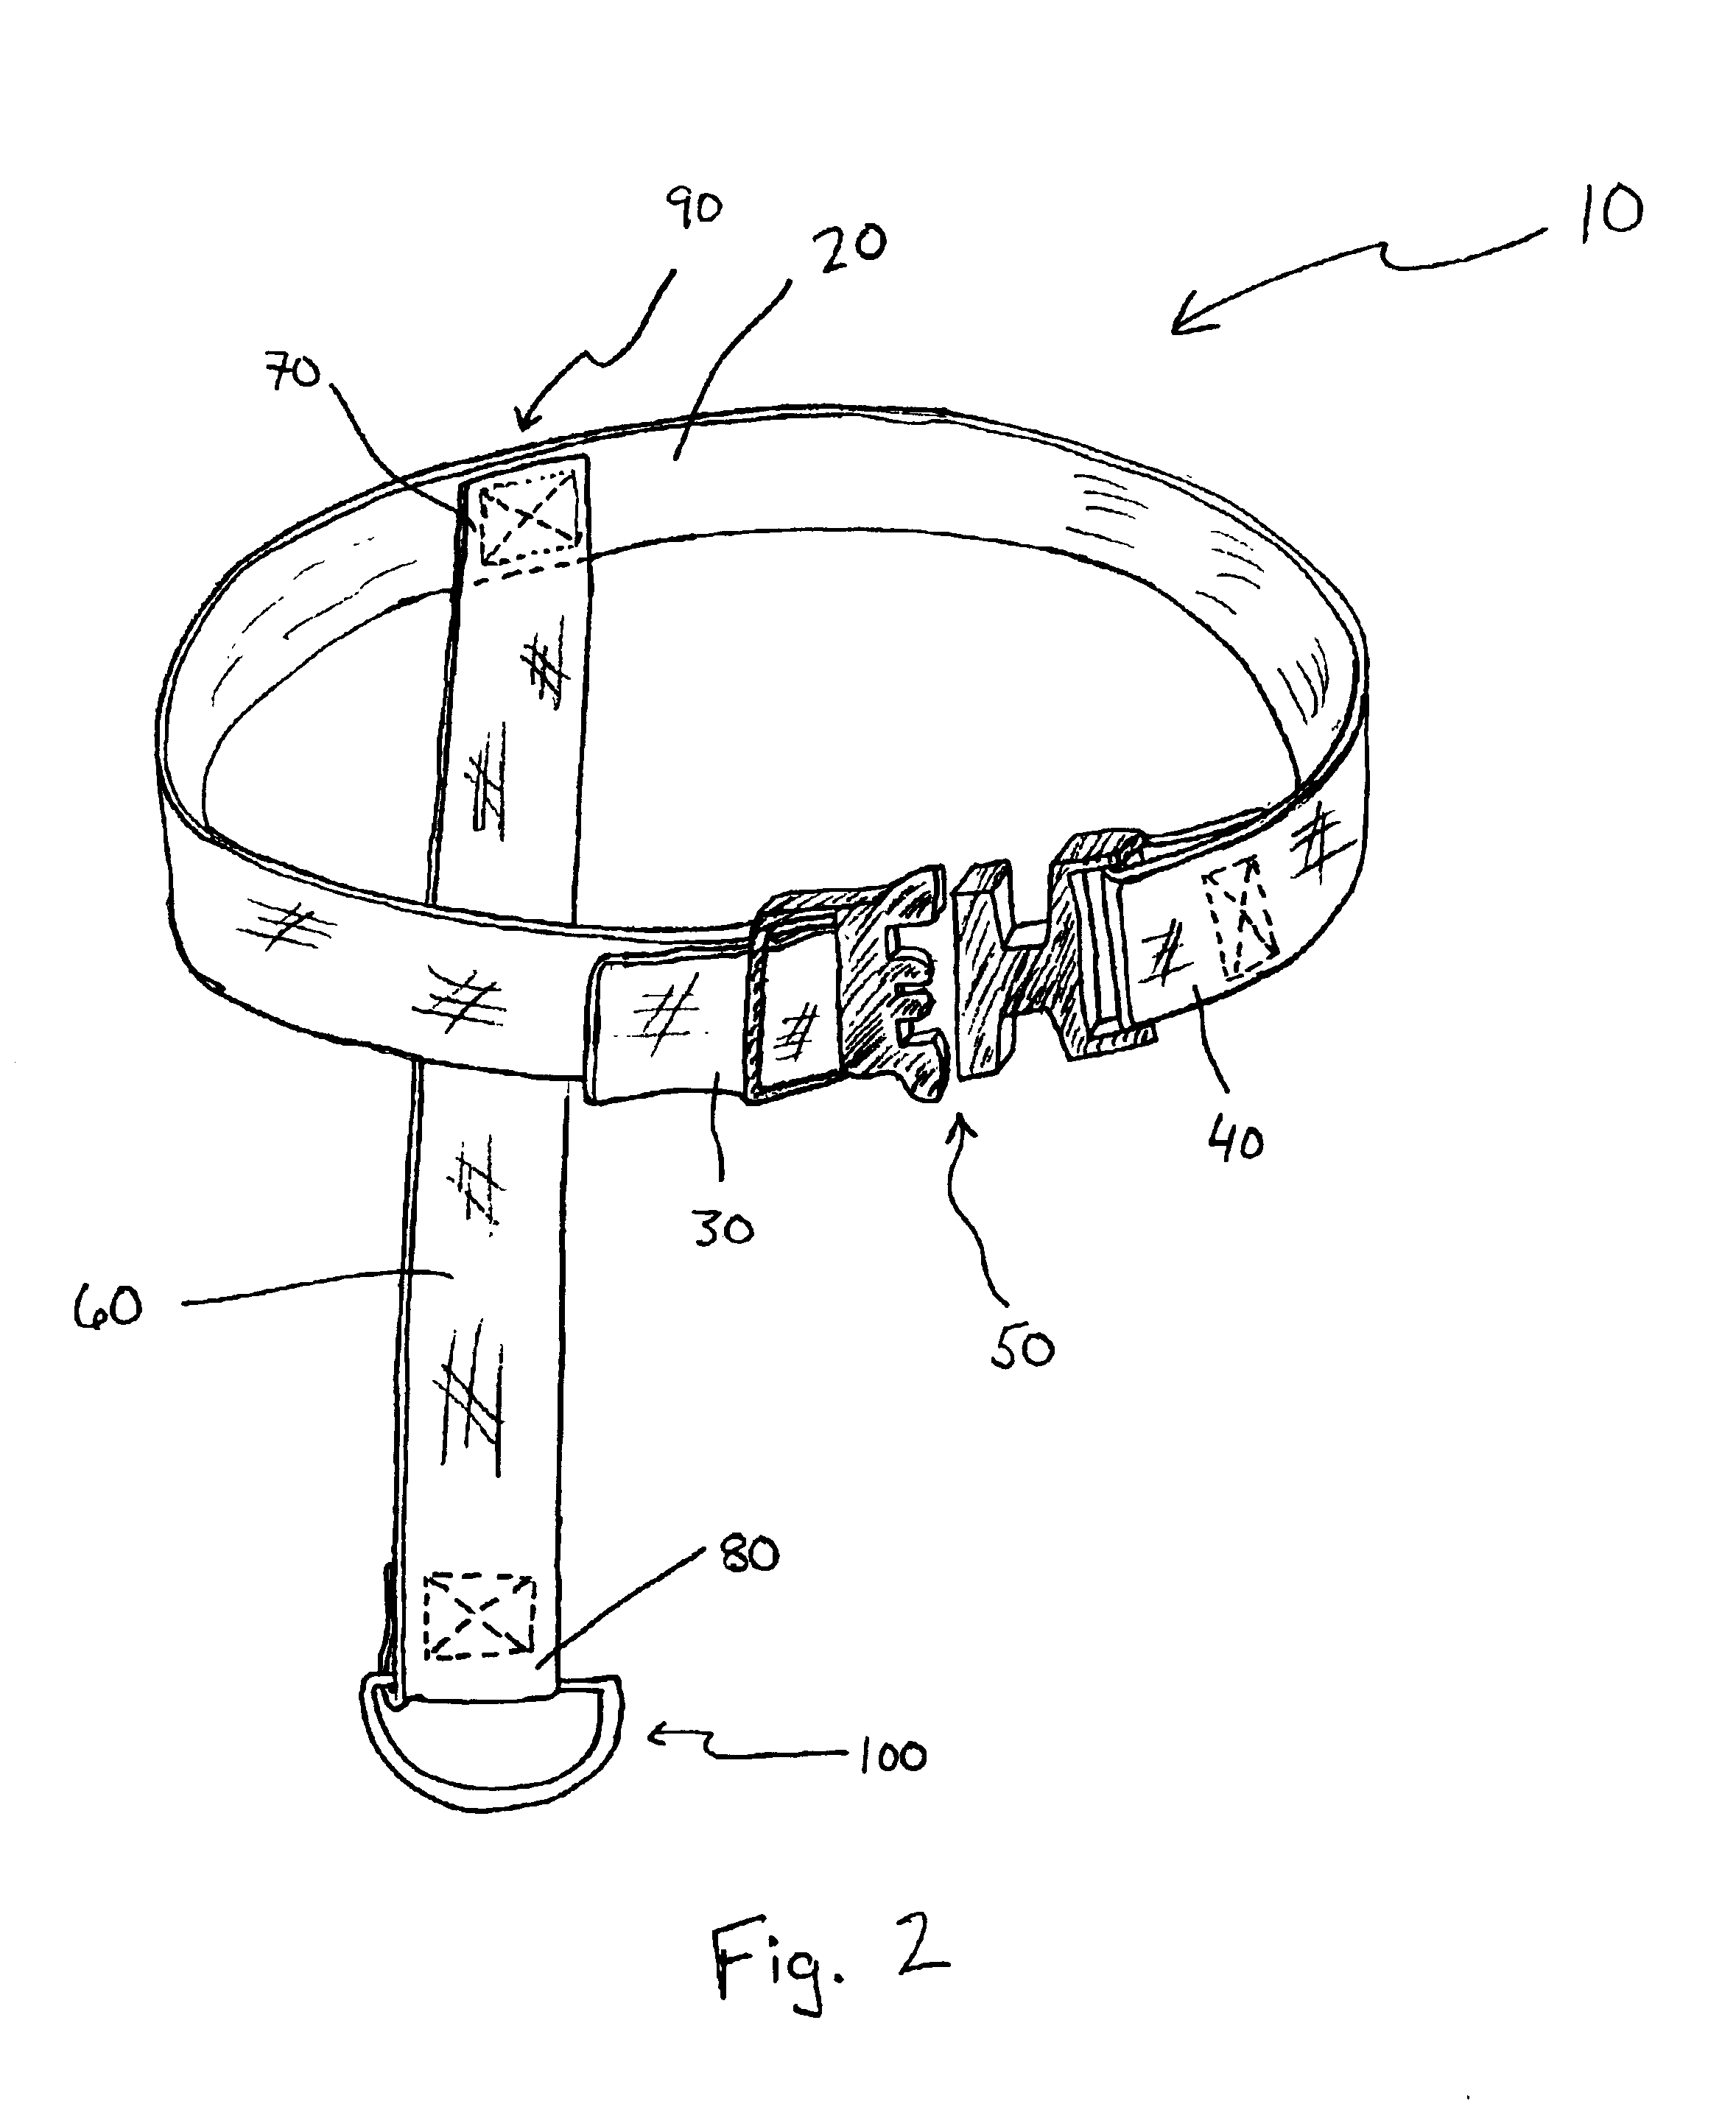 Child safety restraining device for use where a child is seated